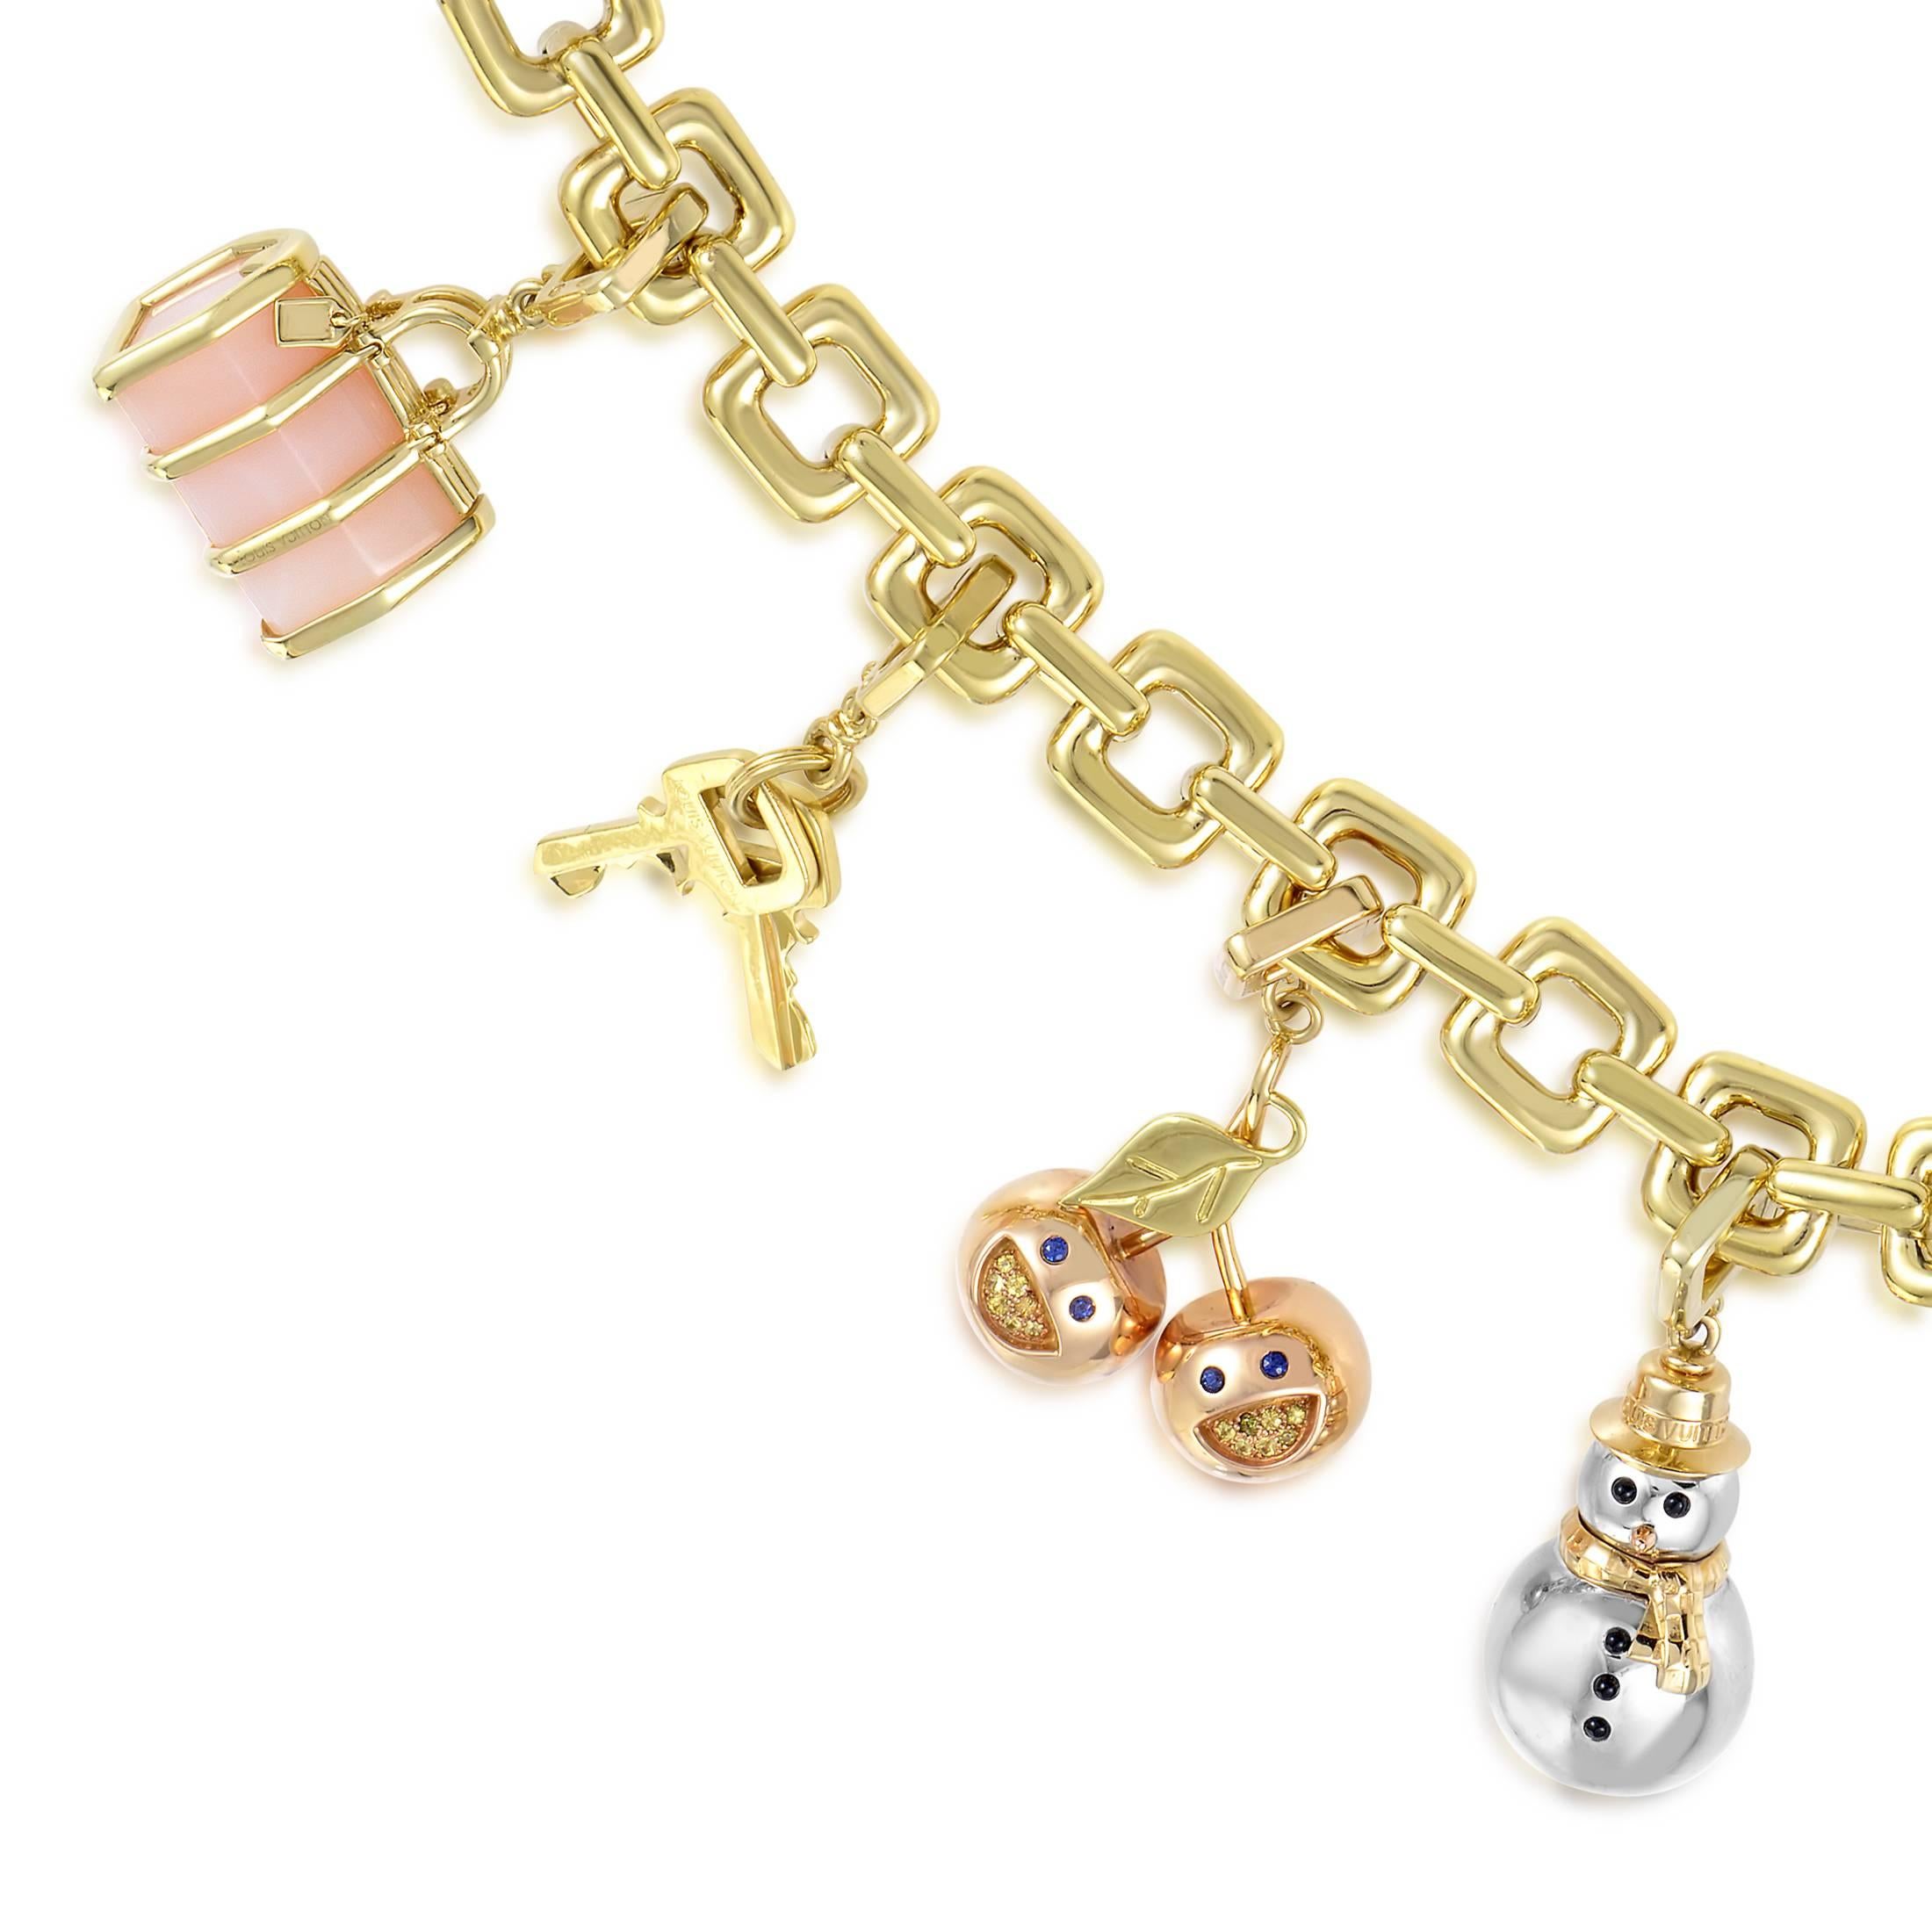 Boasting an intriguing lock as a clasp, this enchanting 18K yellow gold bracelet from Louis Vuitton is adorned with pink quartz stones as well as yellow and blue sapphires while lined with a wonderful selection of charms that includes a set of keys,